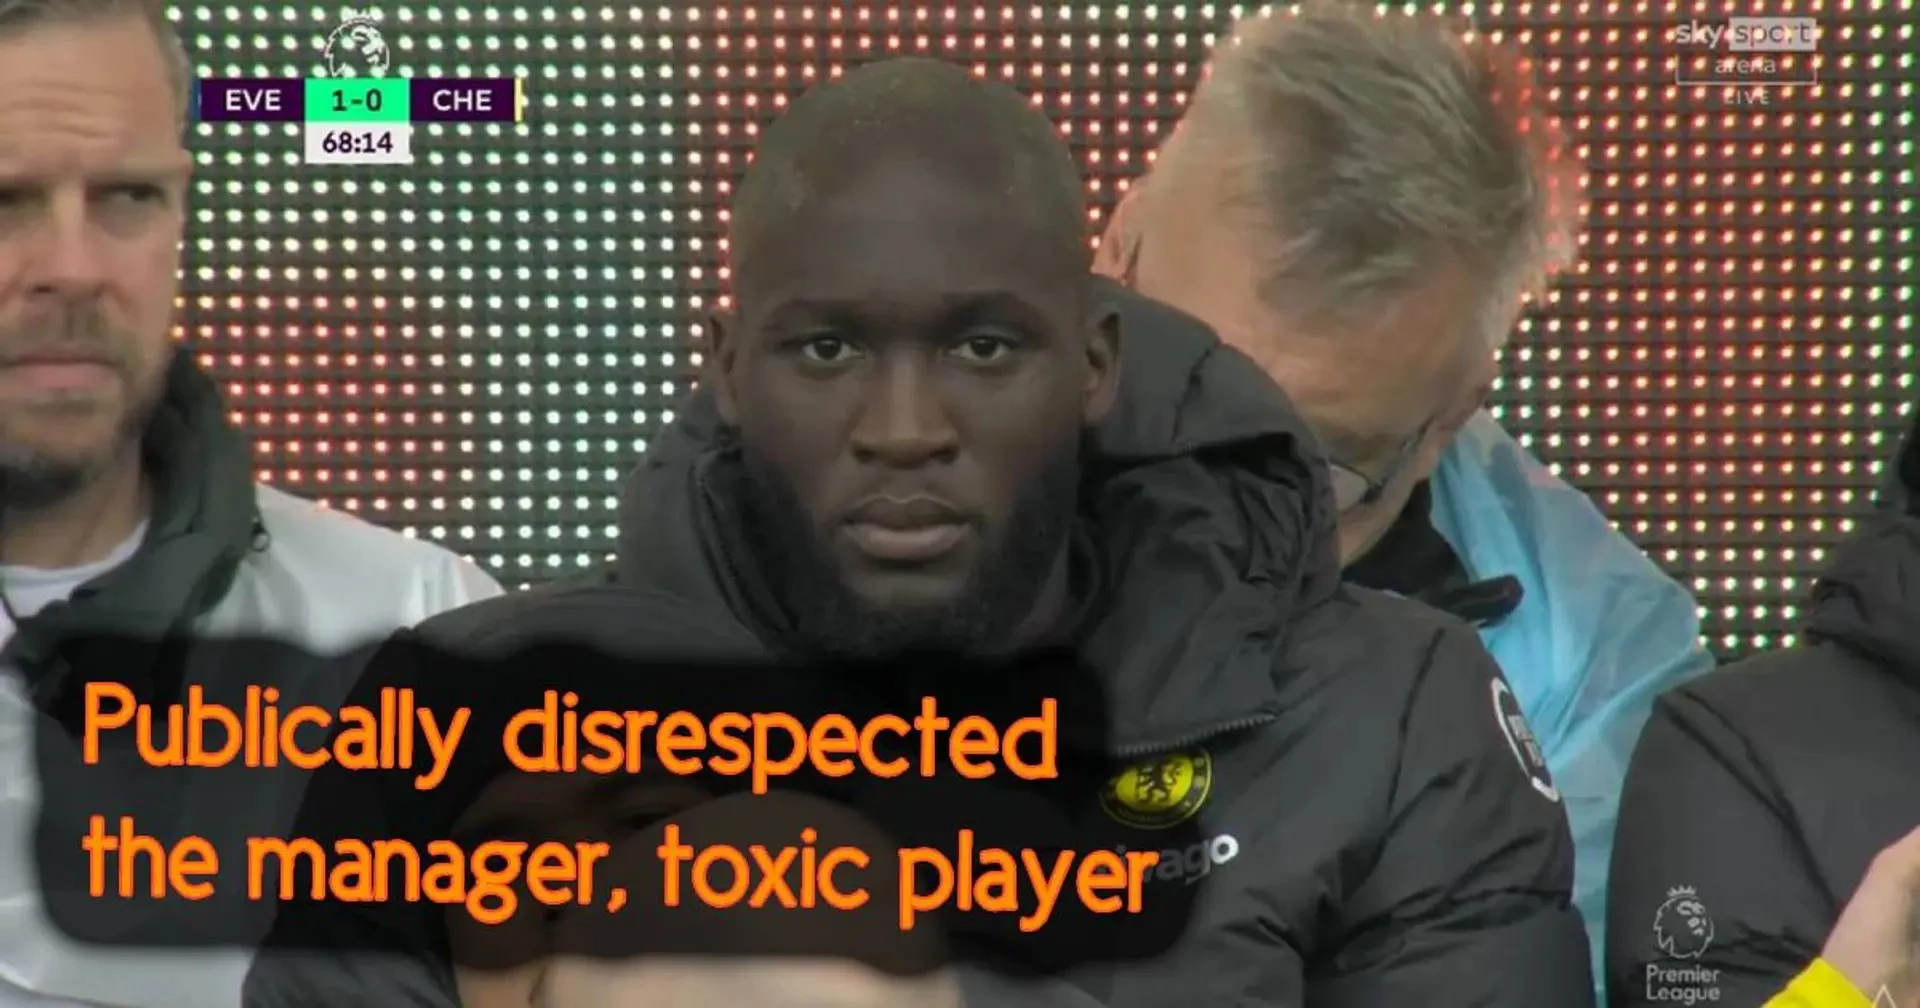 'Worst signing with the worst attitude': Chelsea Fan's tweet criticising Lukaku goes viral